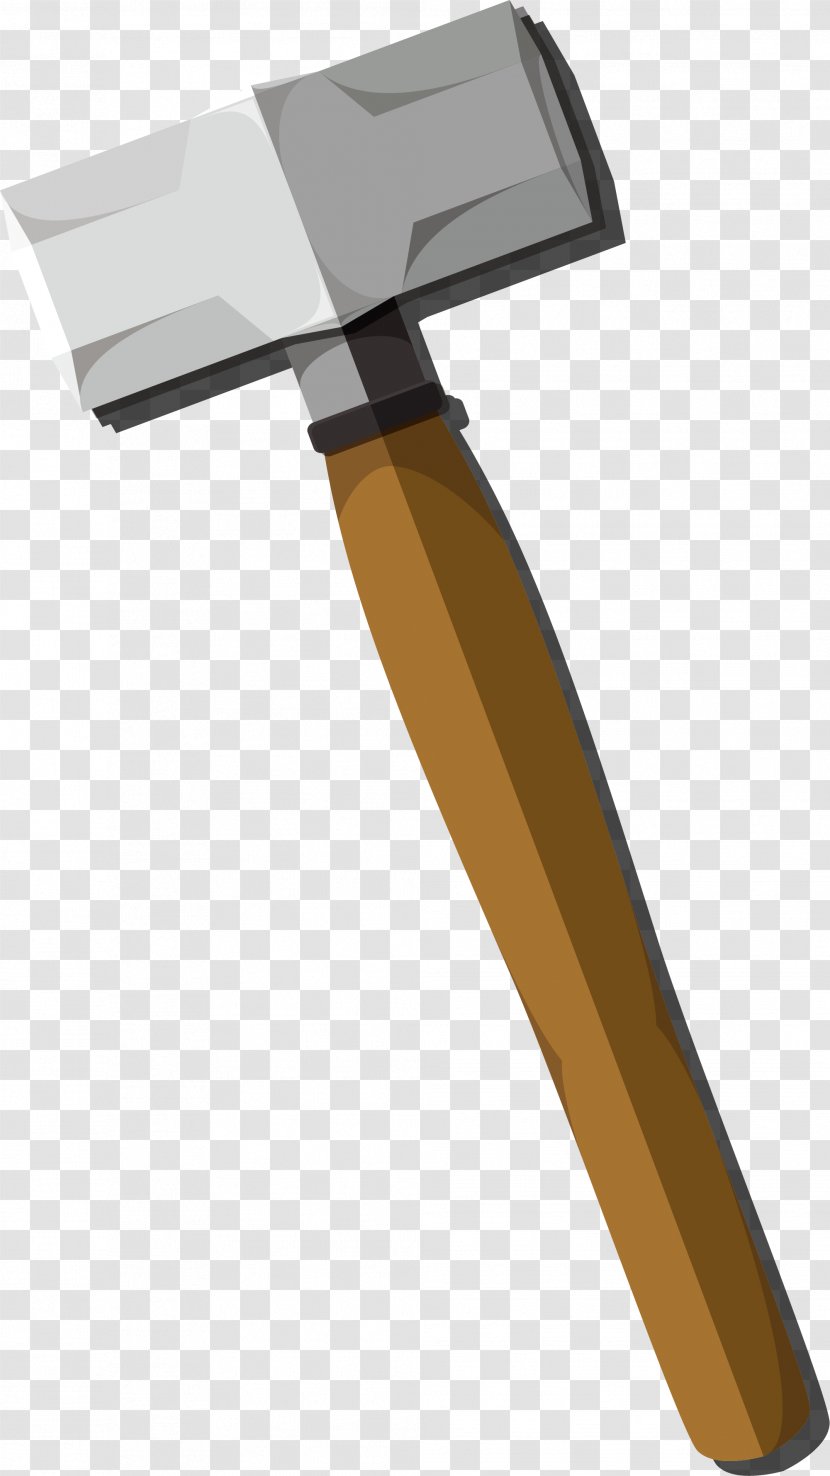 Hammer Pickaxe - Hand Painted Grey Handle Transparent PNG